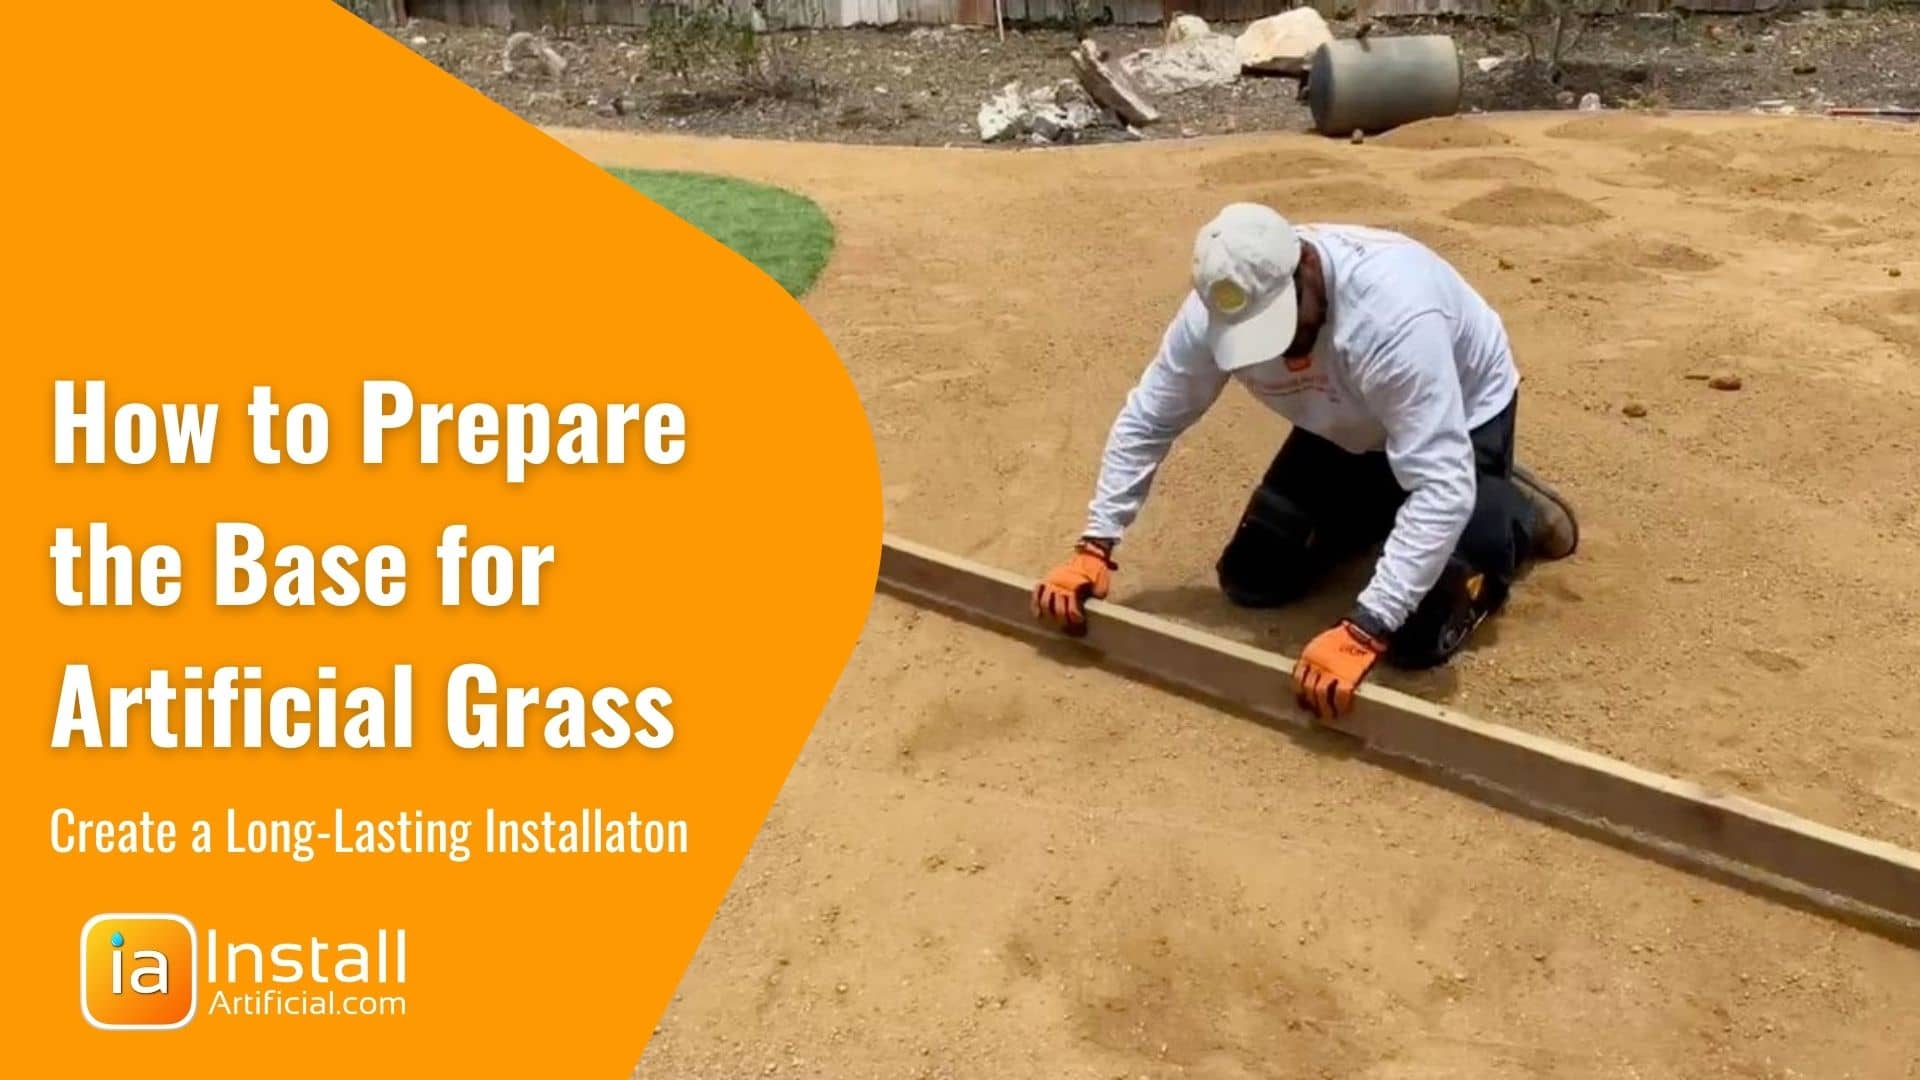 How to Prep the Base for Artificial Turf Installation